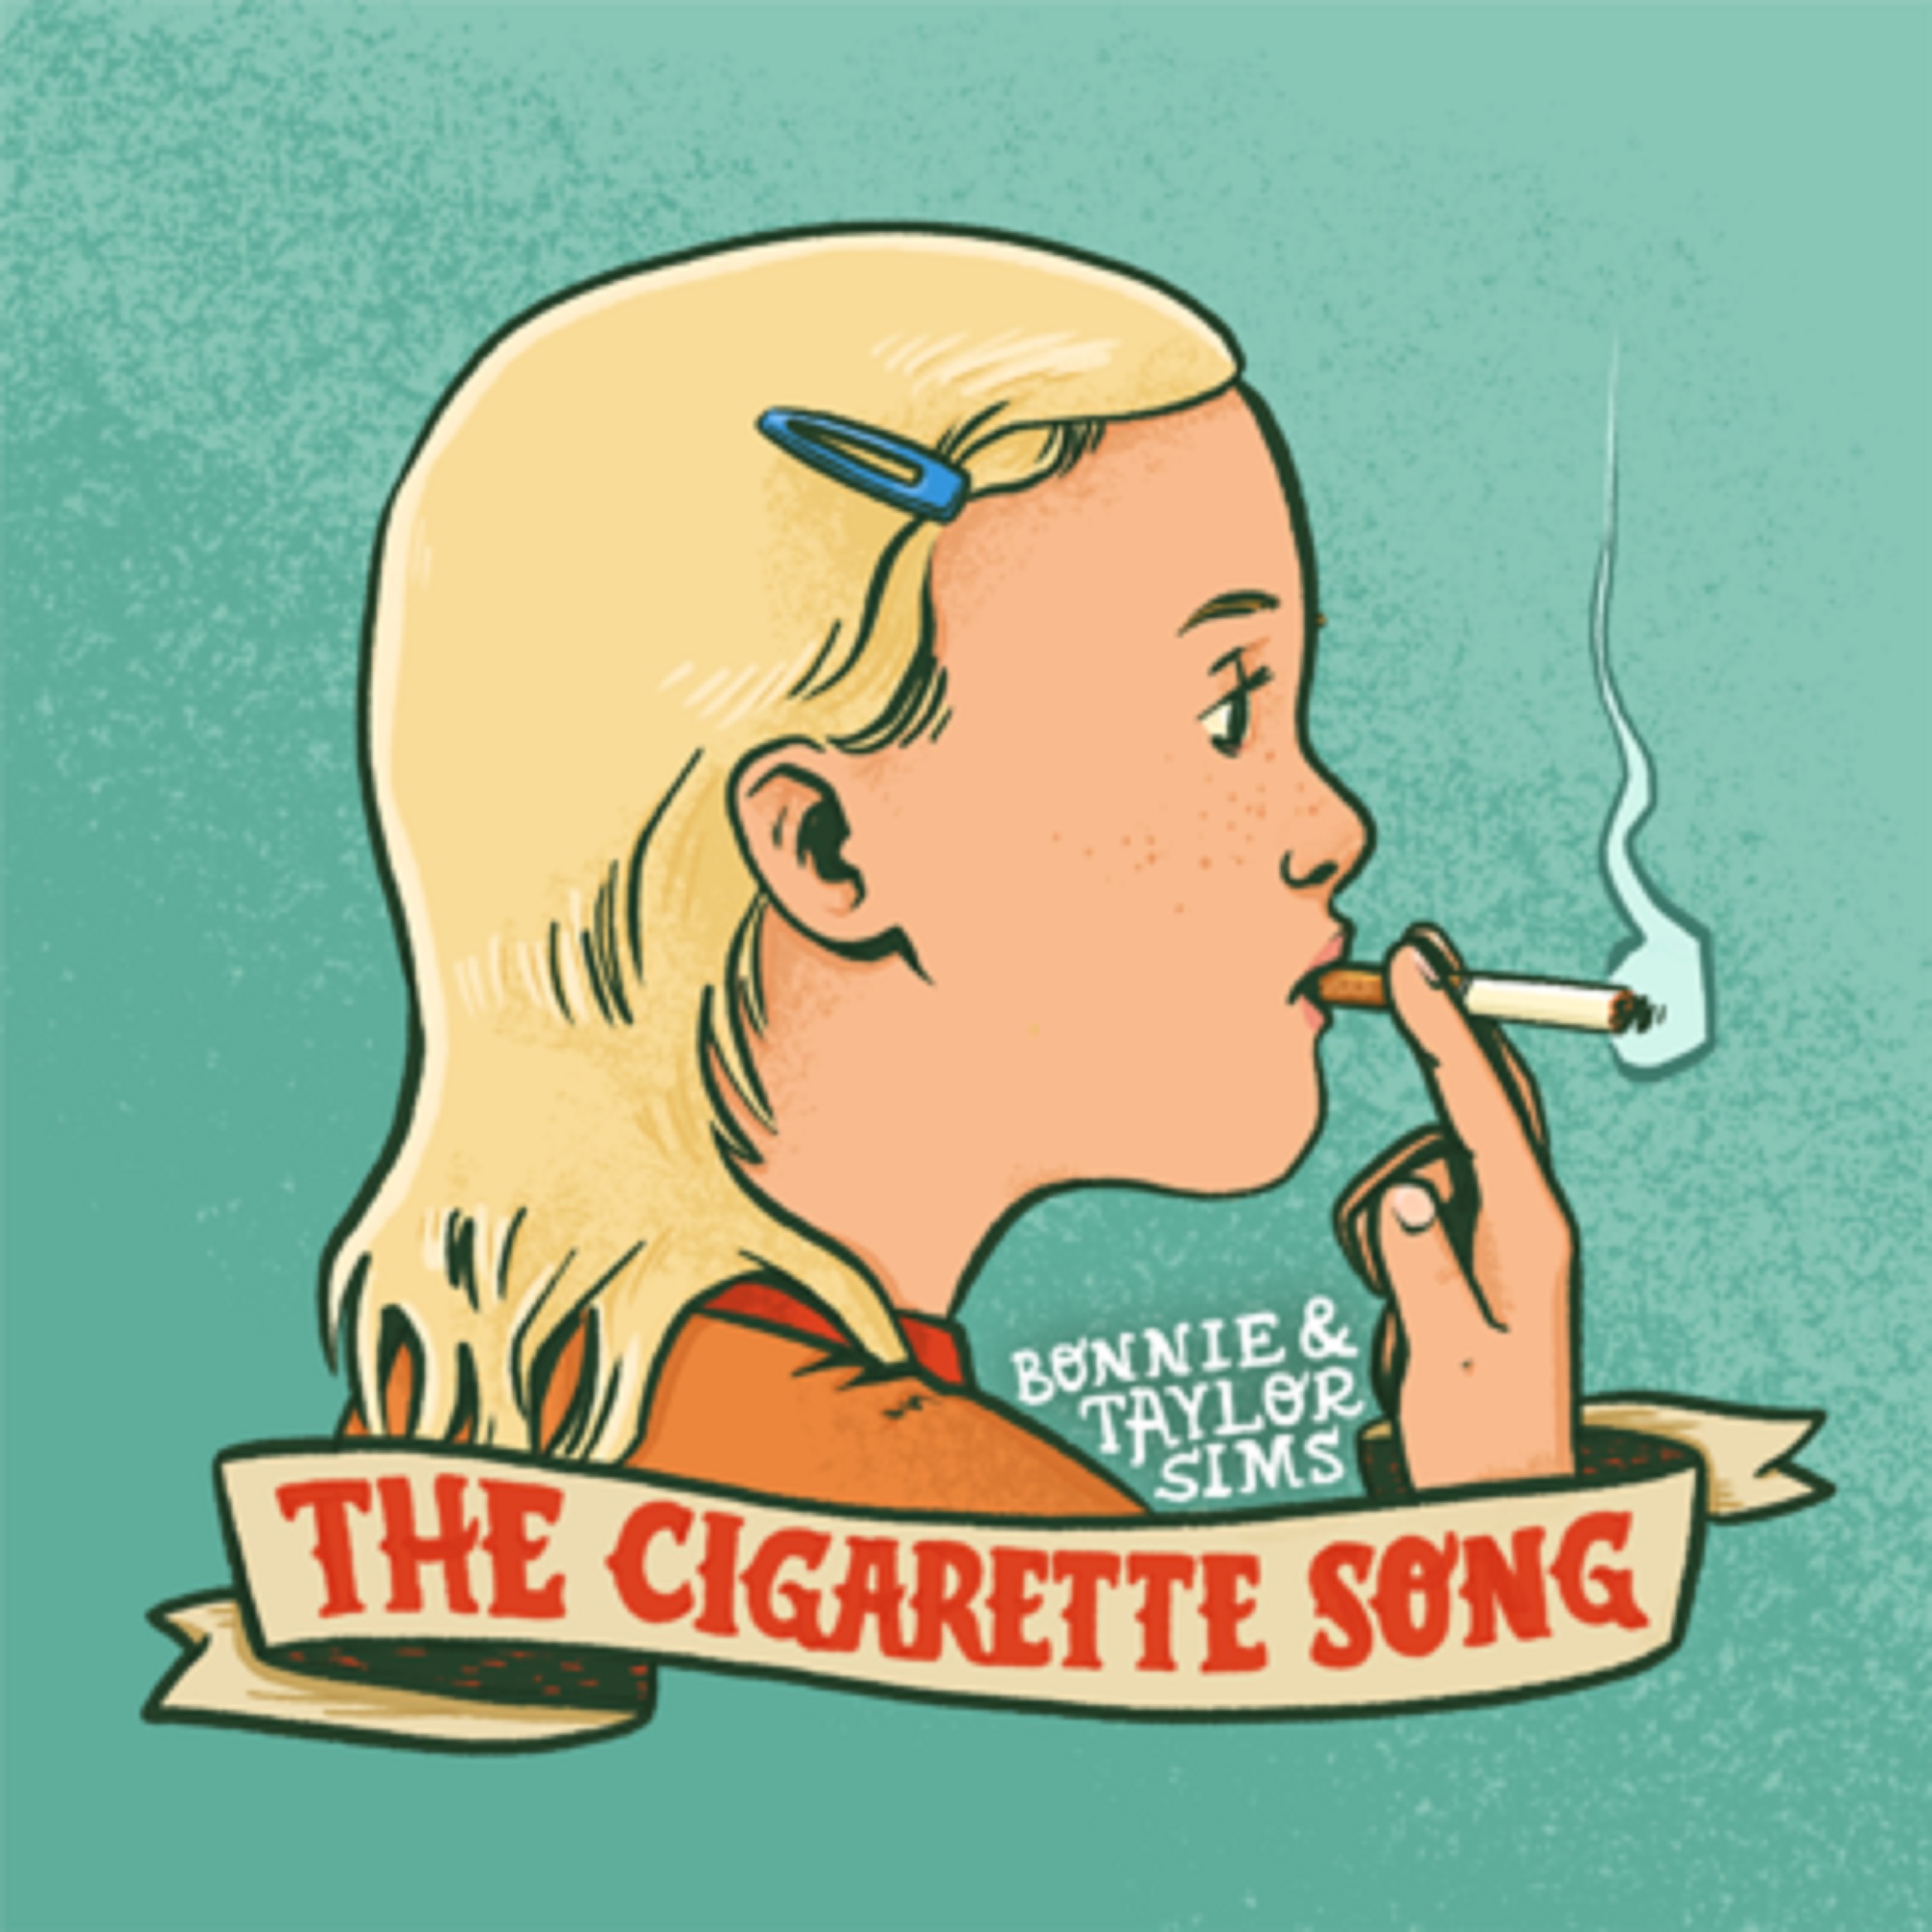 AMERICANA DUO BONNIE & TAYLOR SIMS ARE BREATHING EASY WITH THE RELEASE OF "CIGARETTE SONG"